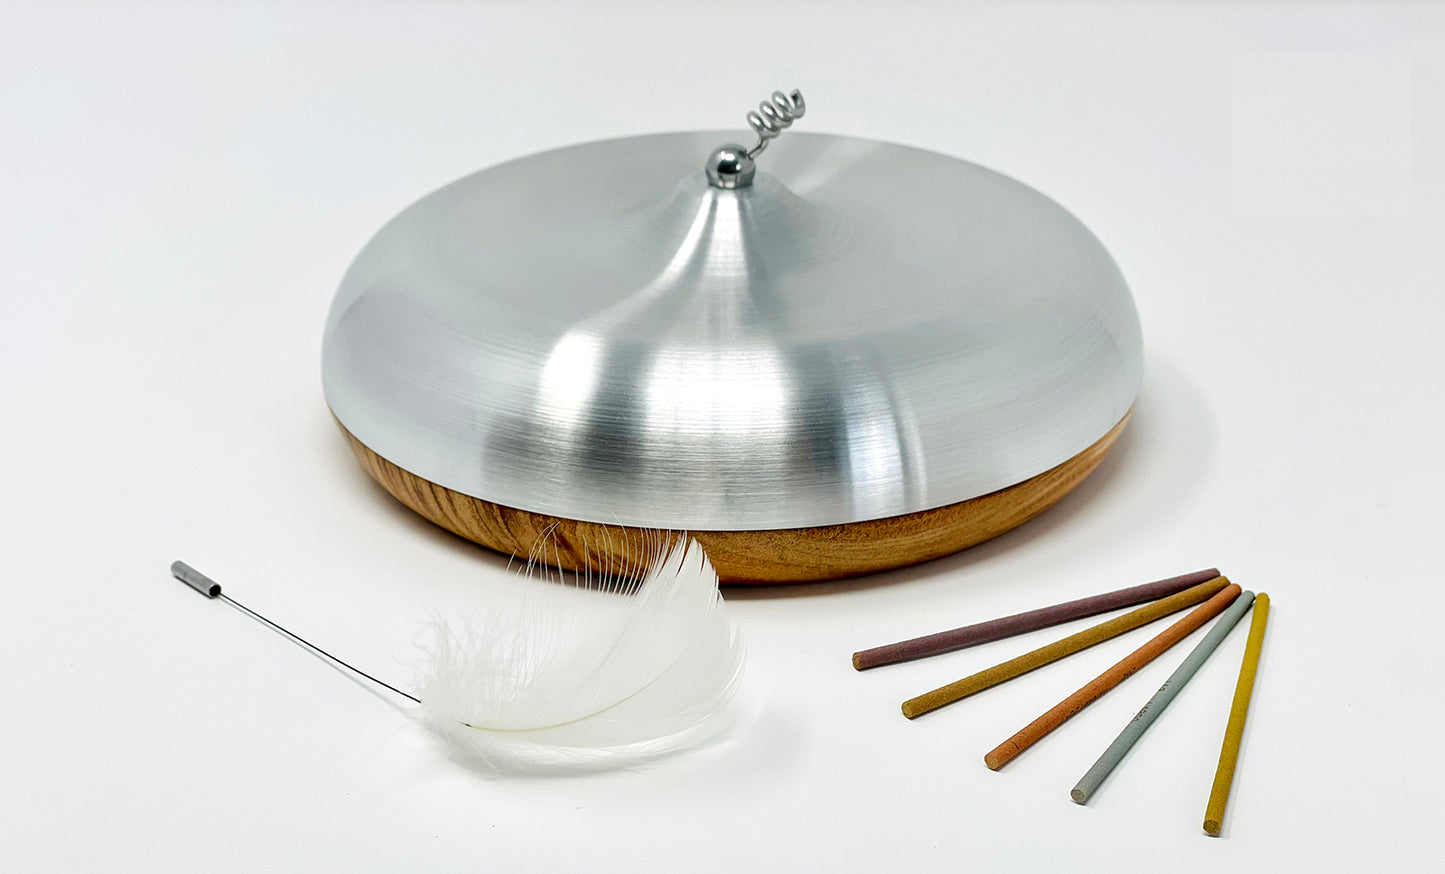 jikou : A new type of incense holder that rotates incense. / 時香：お香がまわる新感覚お香立て /